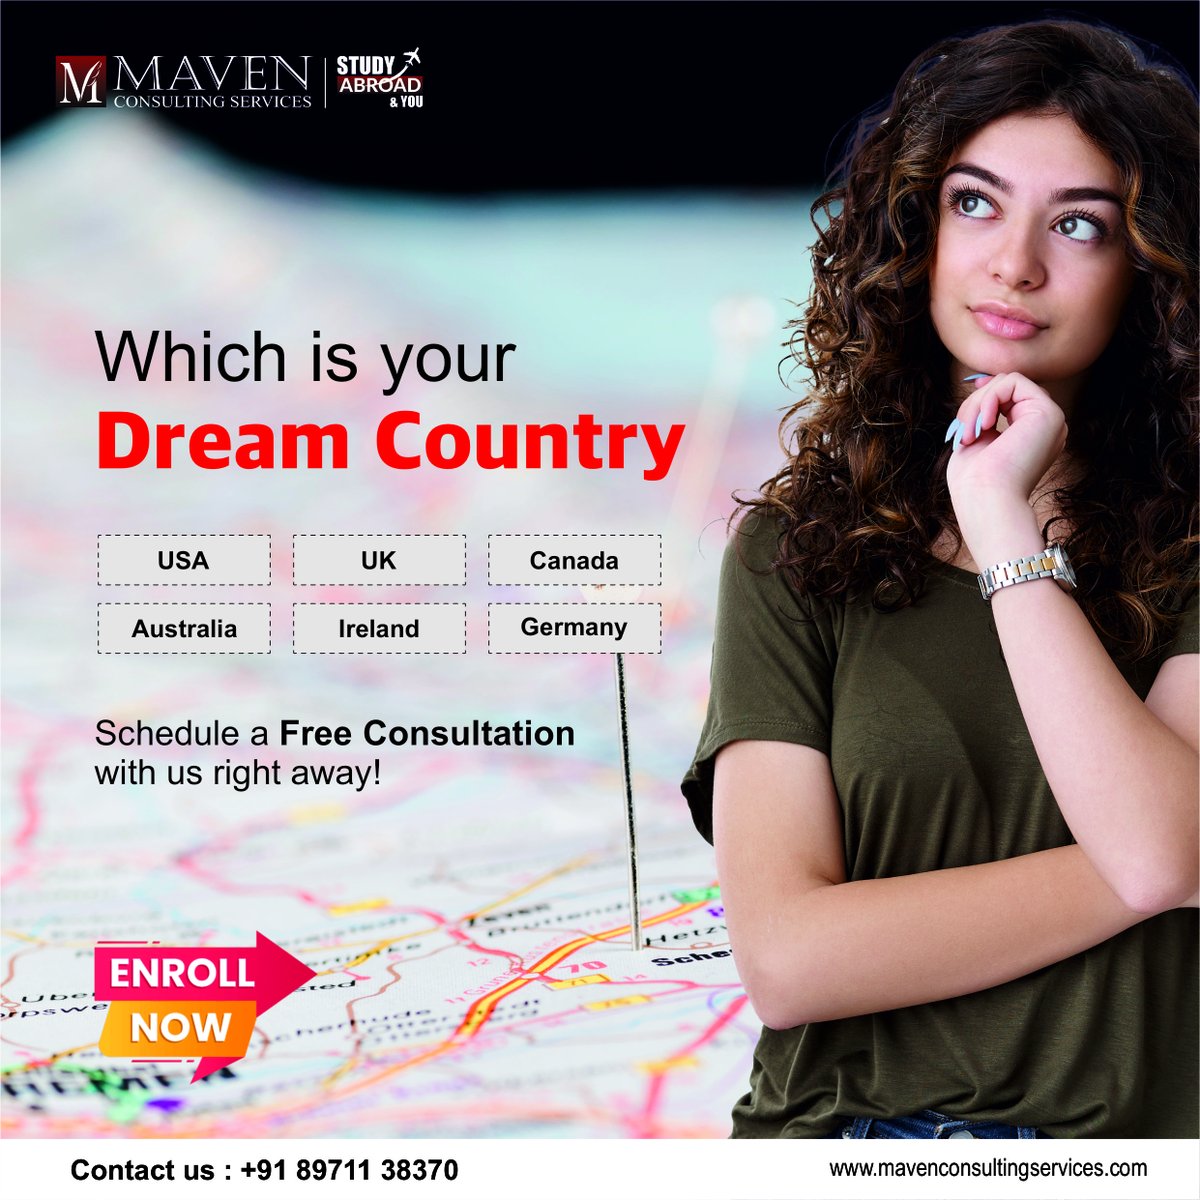 🌍 Dreaming of studying abroad? 🌟 Let us make your dream a reality! 💫 Schedule a free consultation with us today and take the first step towards an unforgettable journey! 🚀✈️ #StudyAbroad #EducationConsultation
Get in touch with us for expert counselling
at +91 89711 38370